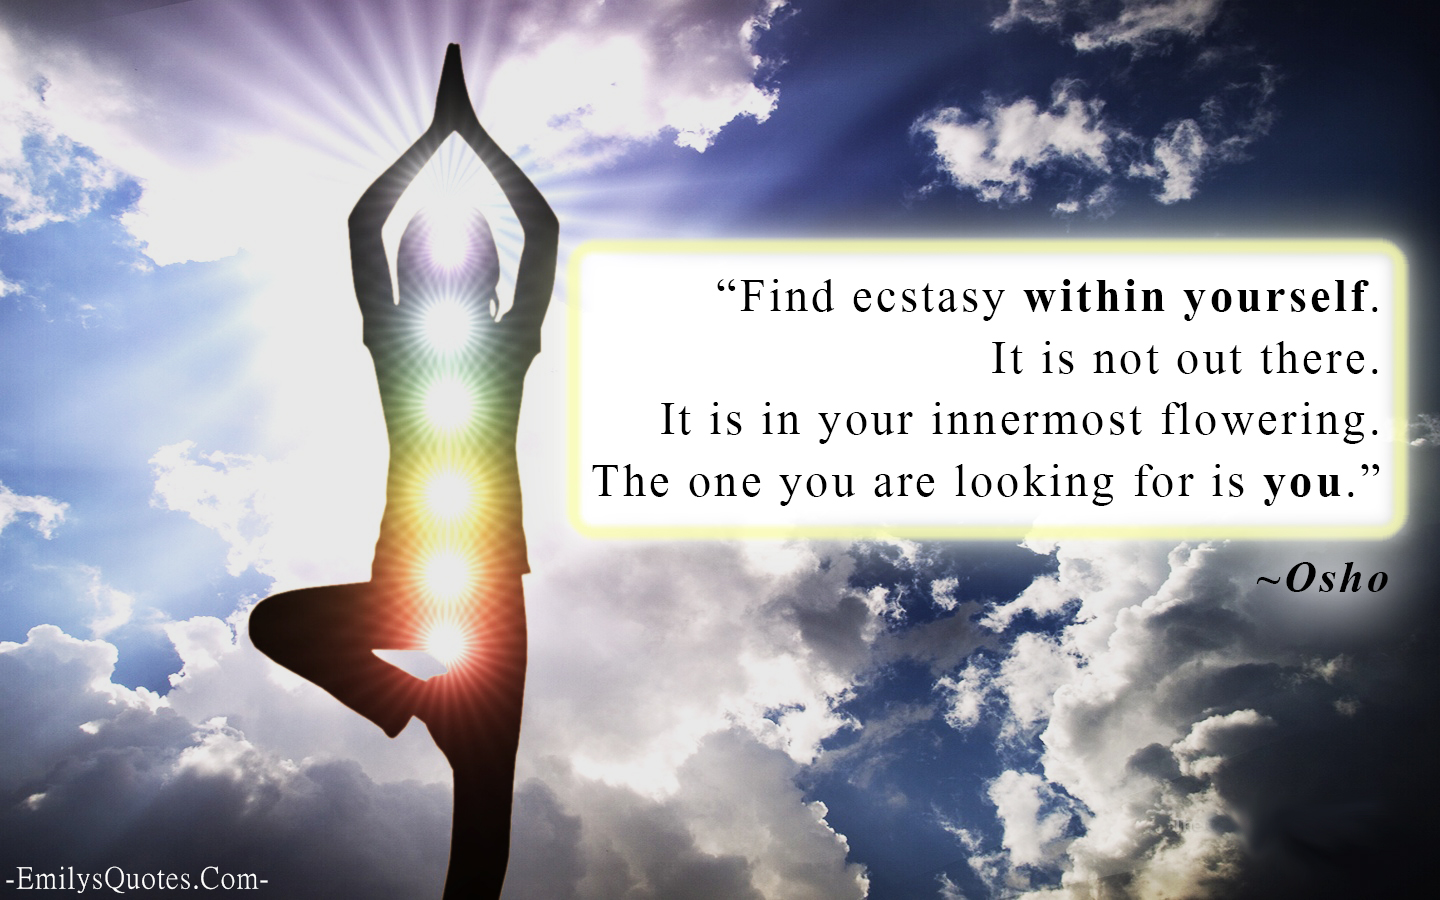 Find ecstasy within yourself. It is not out there. It is in your innermost flowering. The one you are looking for is you